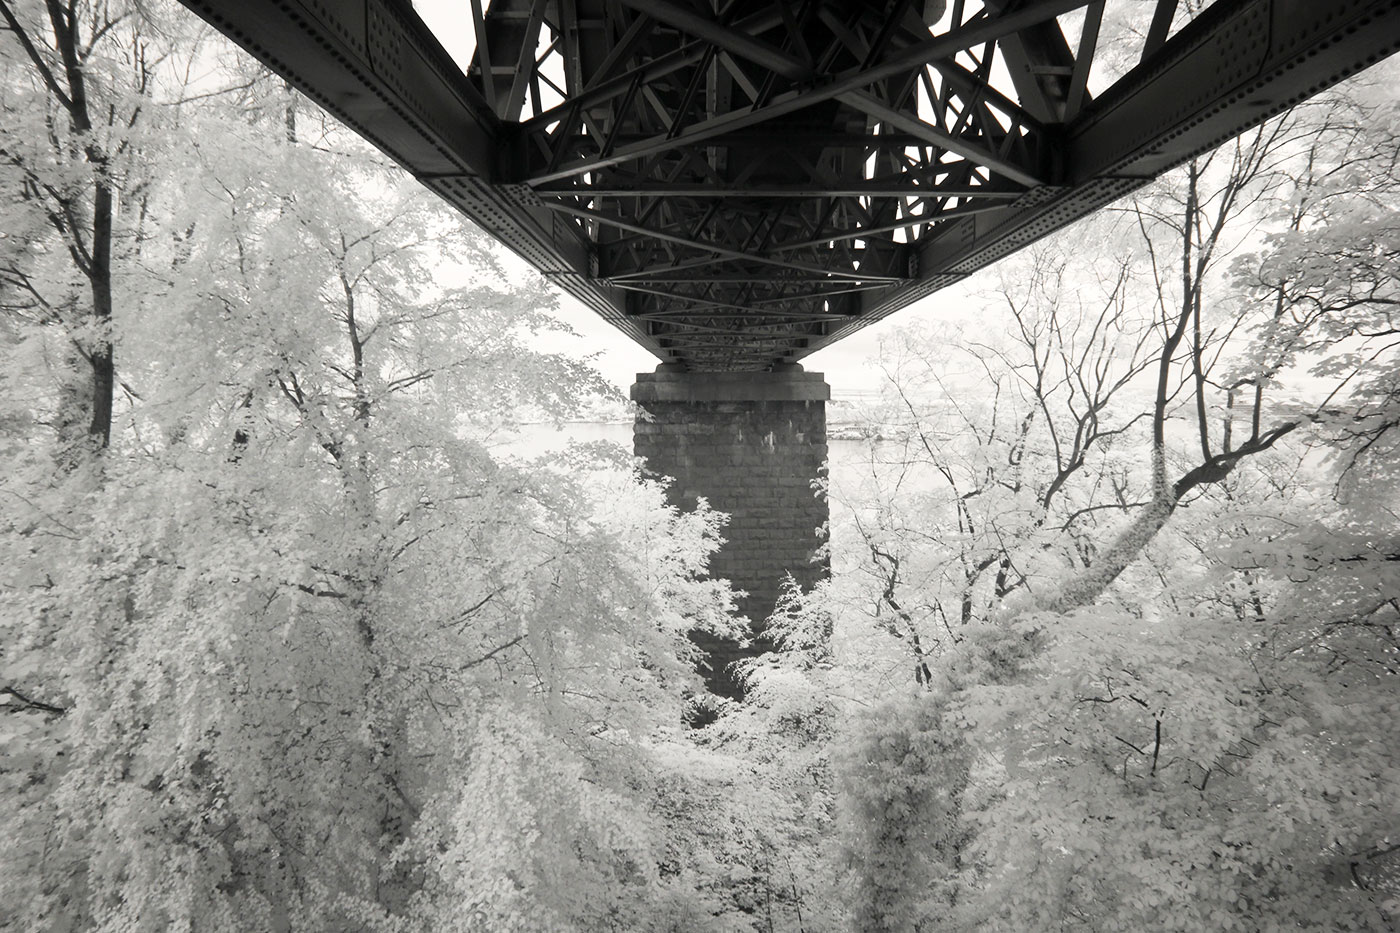 Infra-red Photo  -  The Forth Bridge  -  June 2014